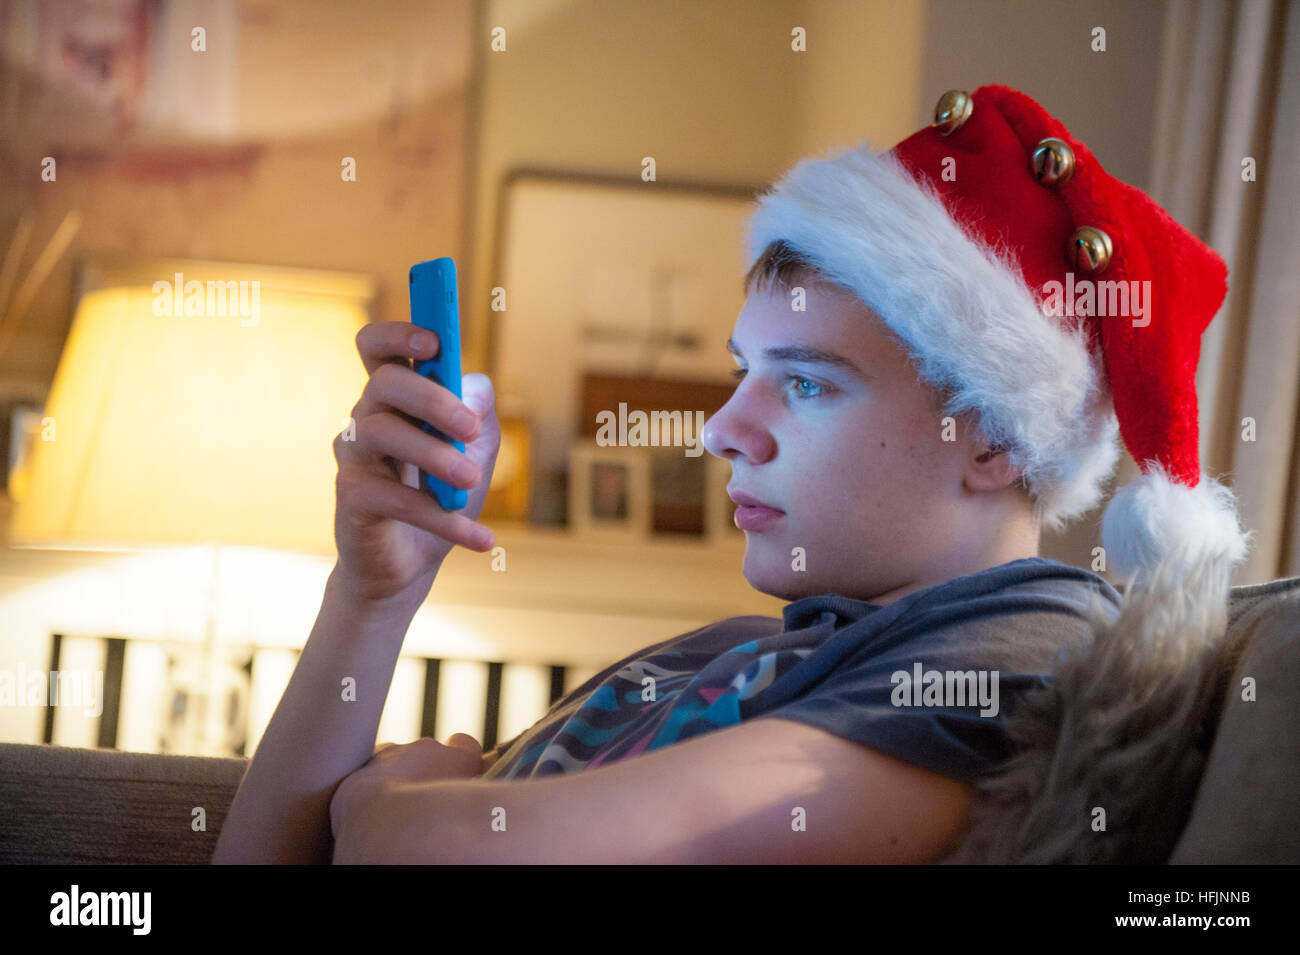 A teenage boy plays with his new phone at Christmas Stock Photo